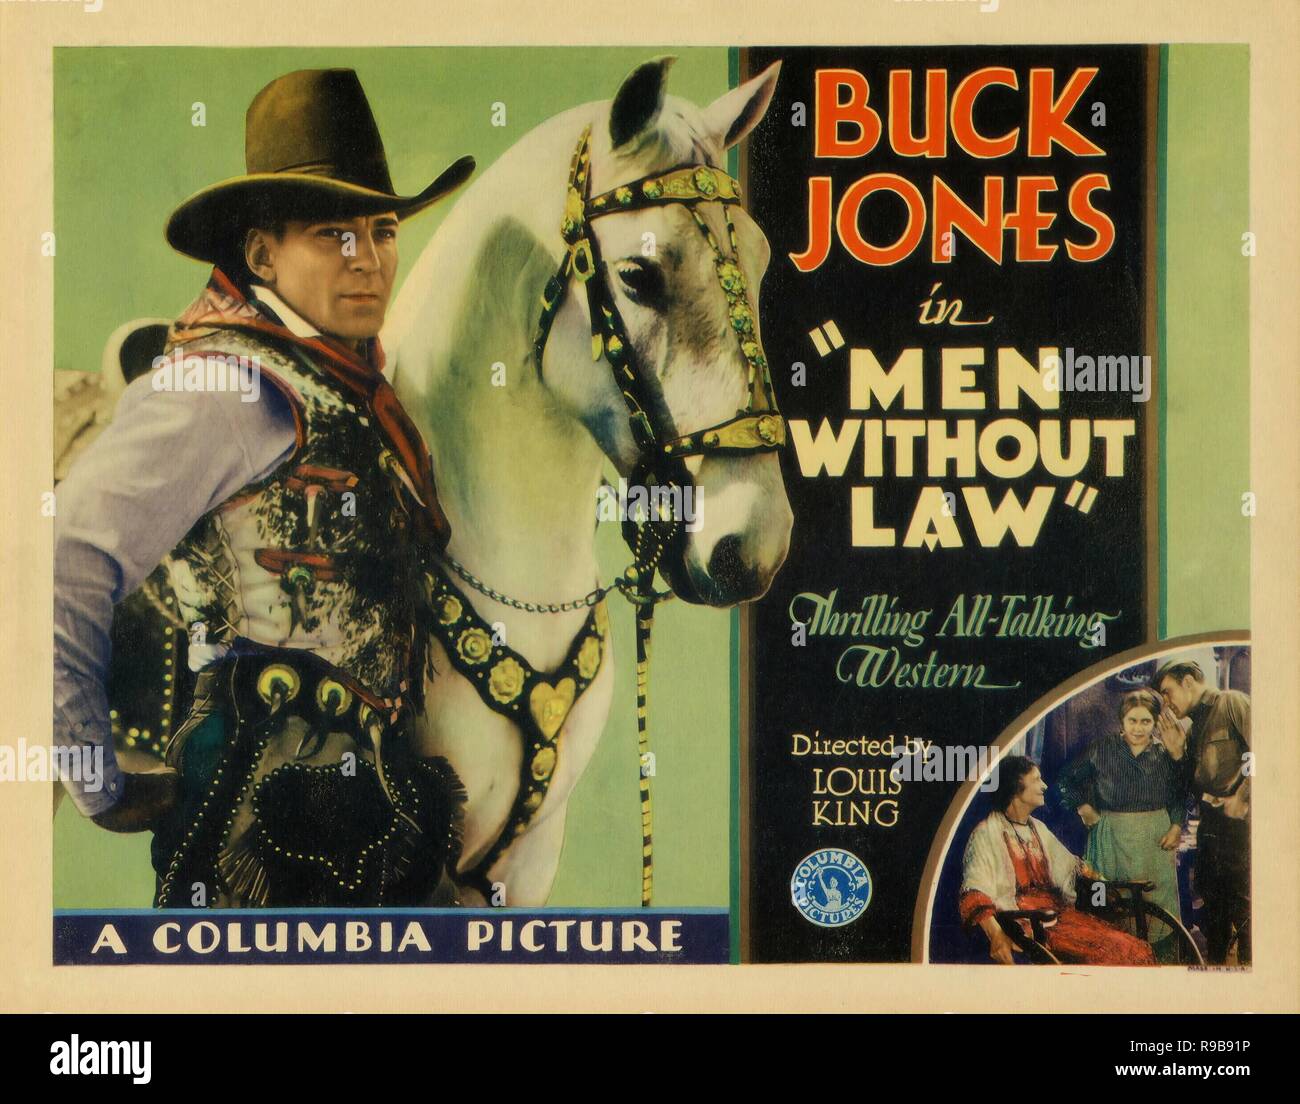 Original film title: MEN WITHOUT LAW. English title: MEN WITHOUT LAW. Year: 1930. Director: LOUIS KING; ARTHUR ROSSON. Credit: COLUMBIA PICTURES / Album Stock Photo